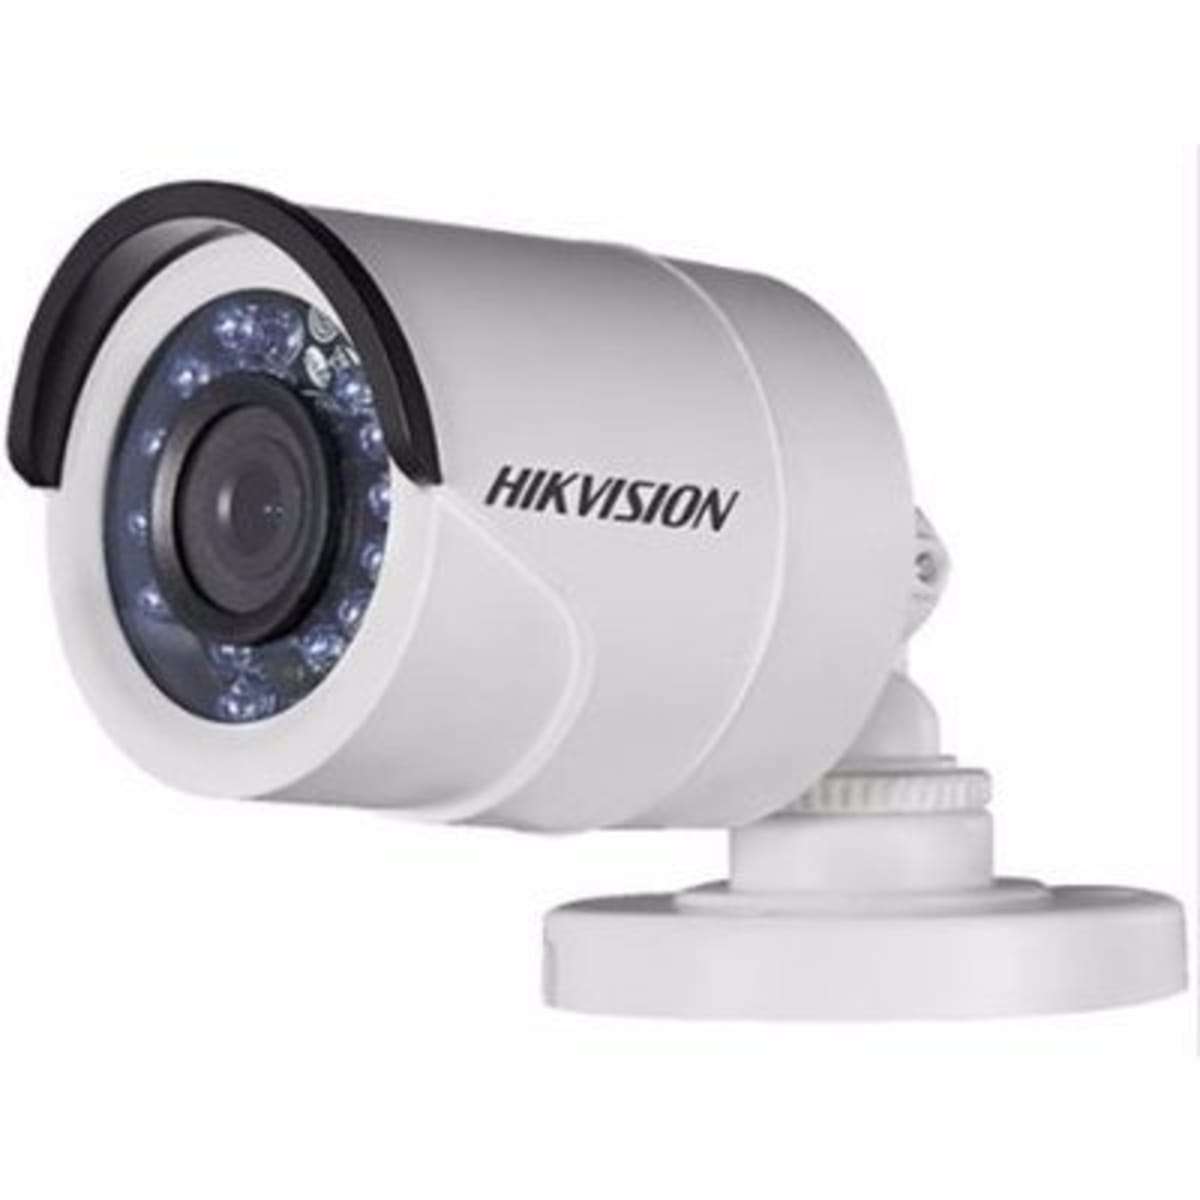 HikVision Day & Night Outdoor Bullet Turbo Camera 3.6mm 720P - 0T-IRP |  Konga Online Shopping